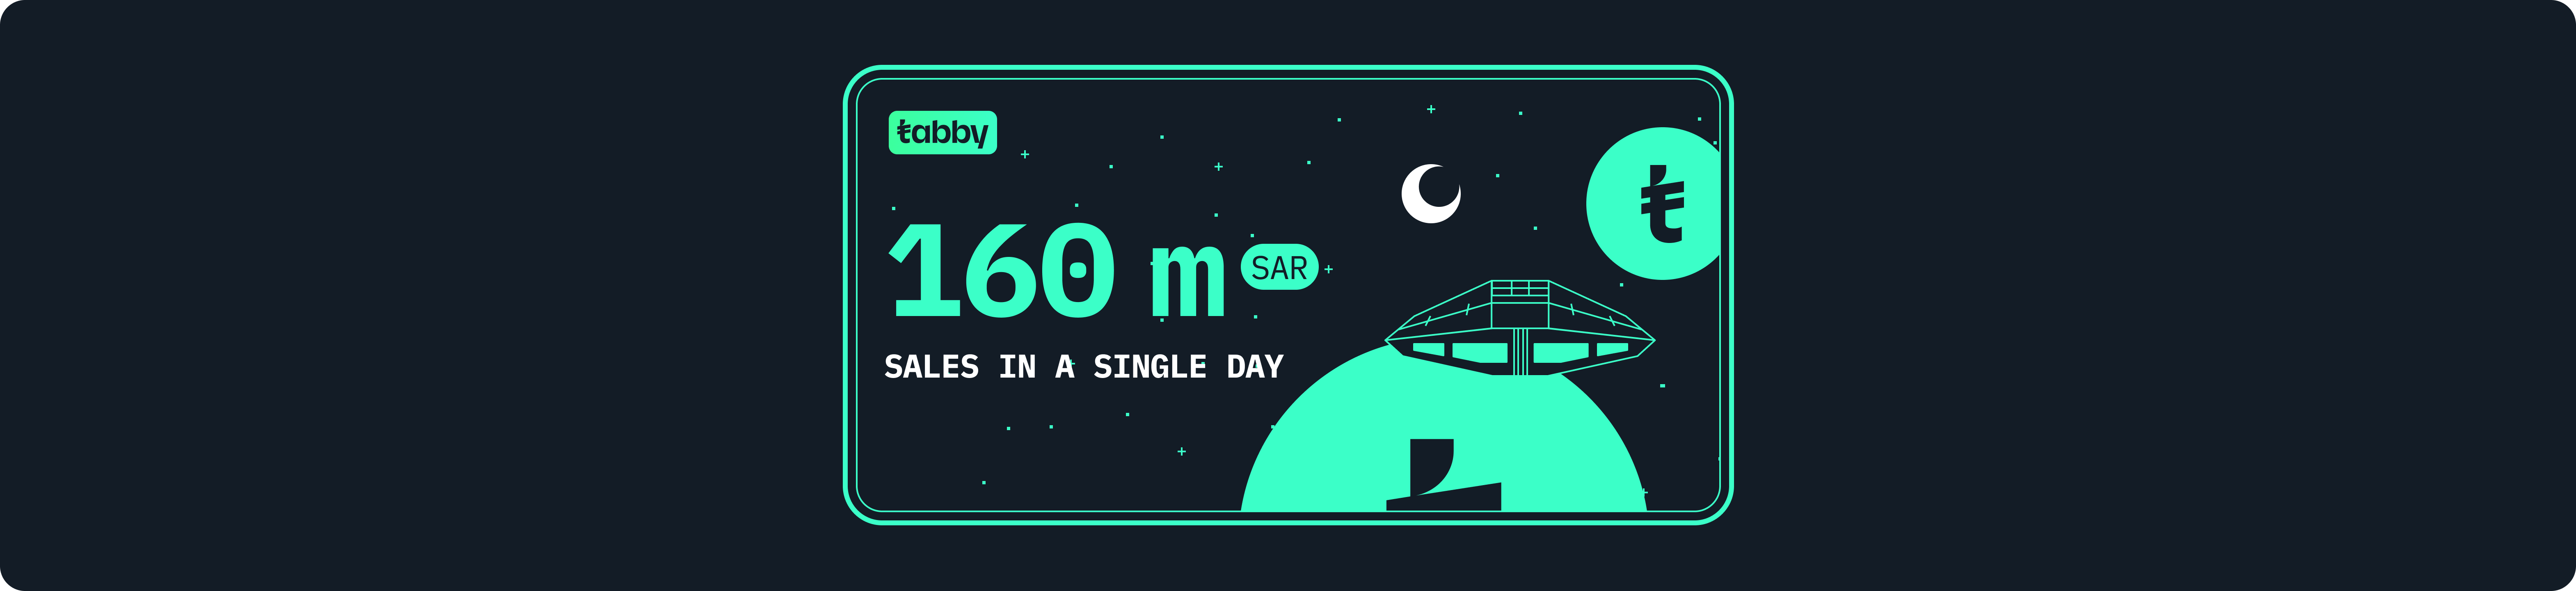 Peak Ramadan Shopping with Over SAR 160M Processed in Just 24 Hours Through Tabby